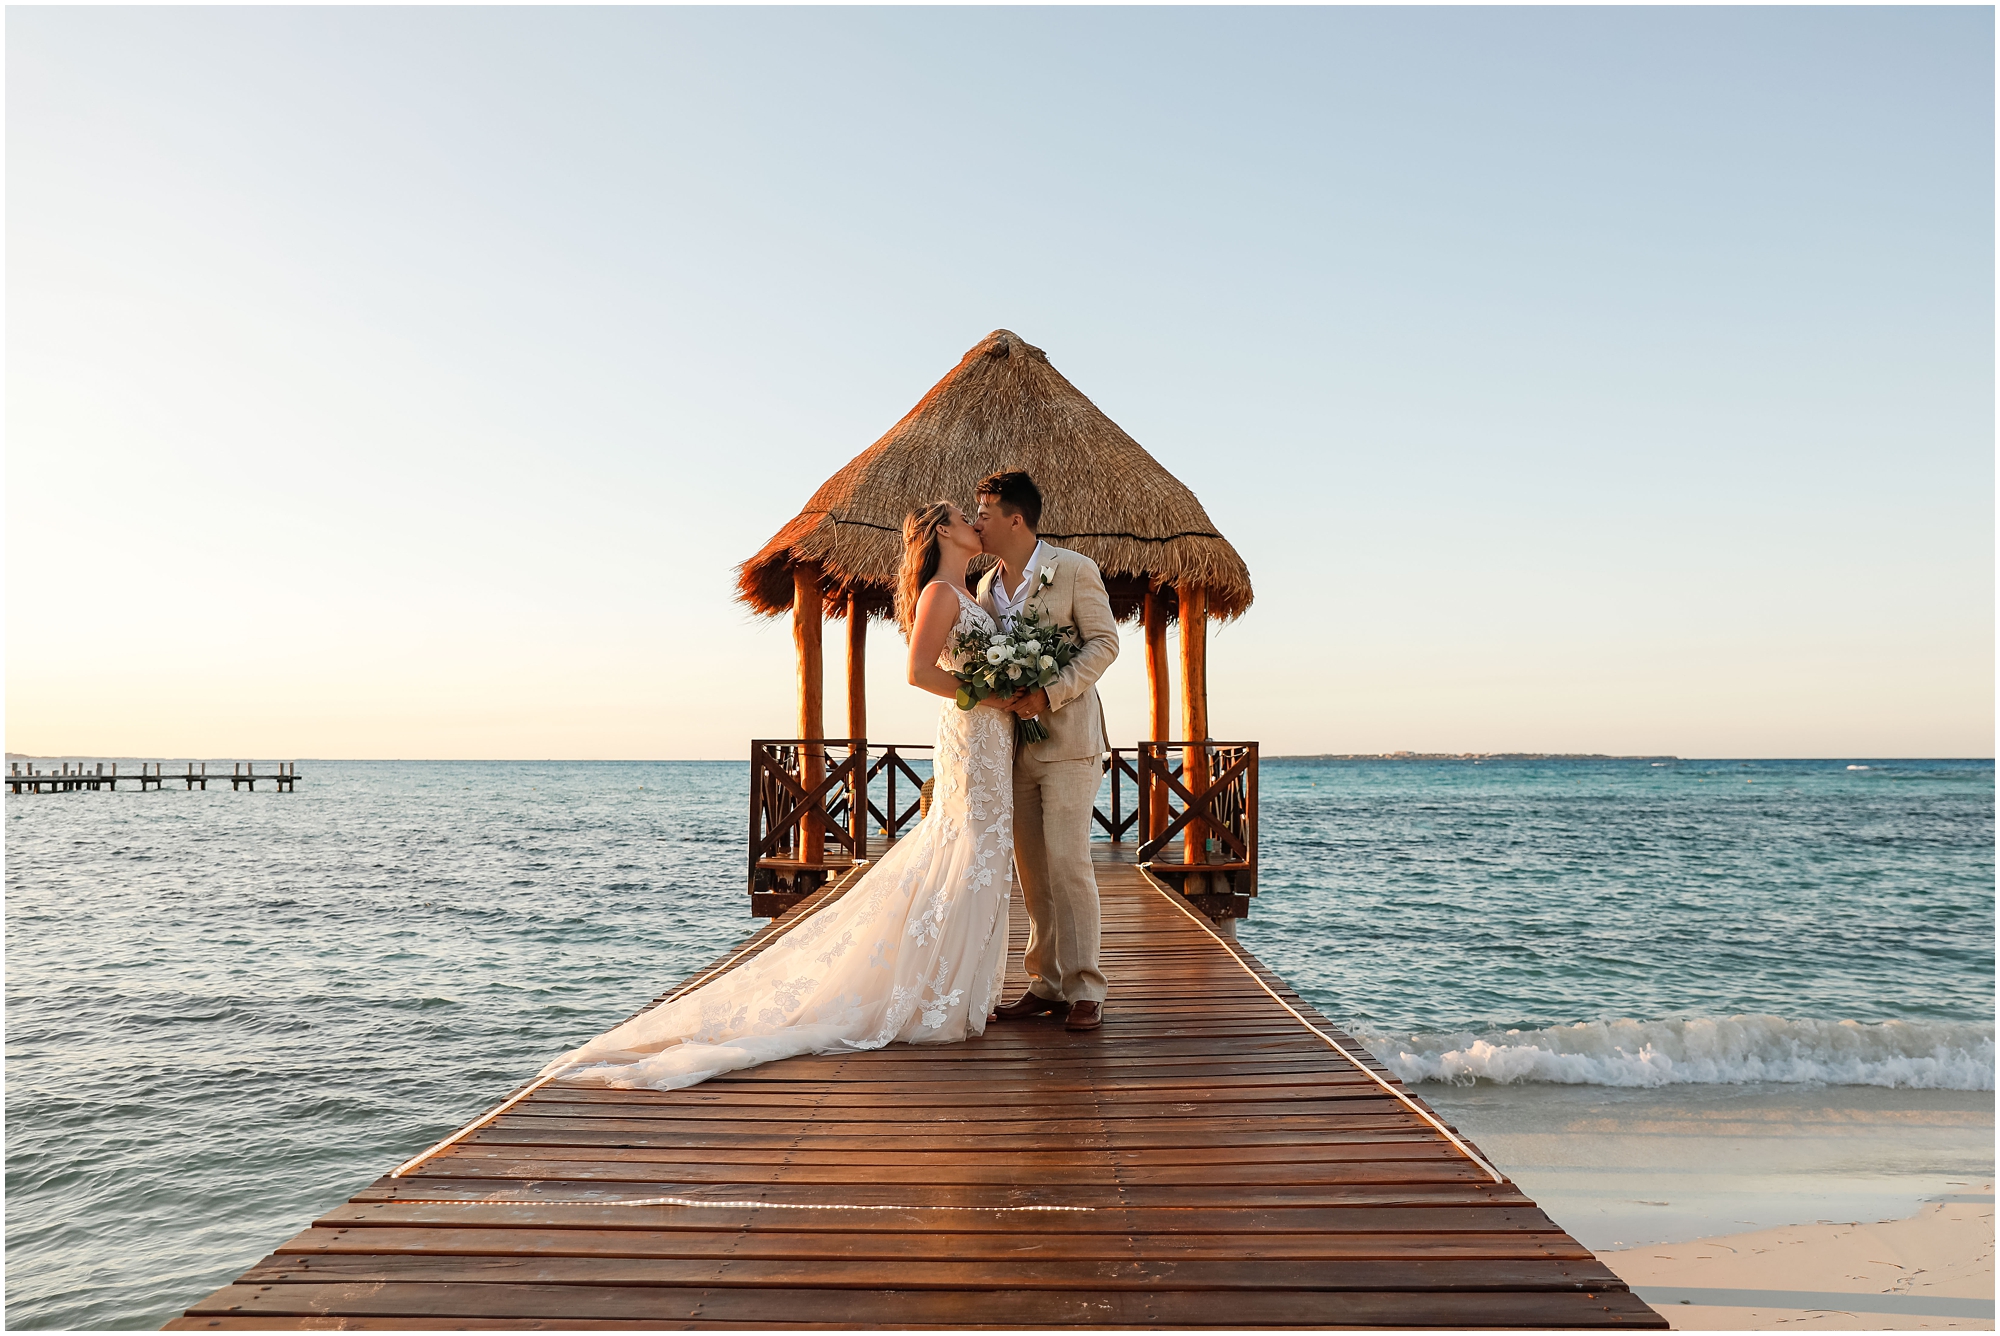 Bride and Groom on dock by ocean in Cancun Mexico